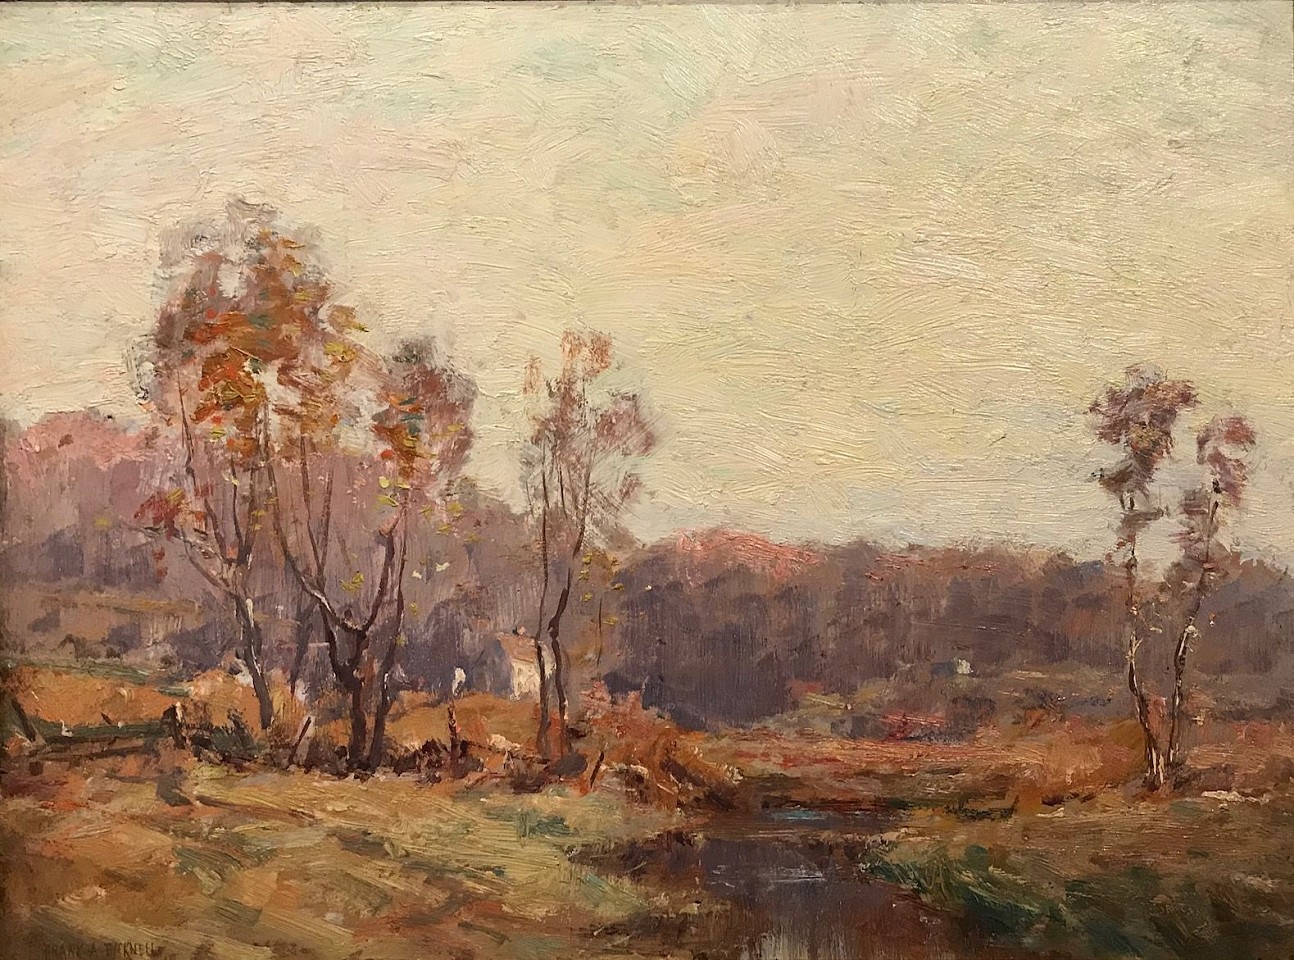 Frank Alfred Bicknell, An October Afternoon
oil on board, 12" x 16"
signed Frank A Bicknell, l.l.
JCA 6315
$6,500